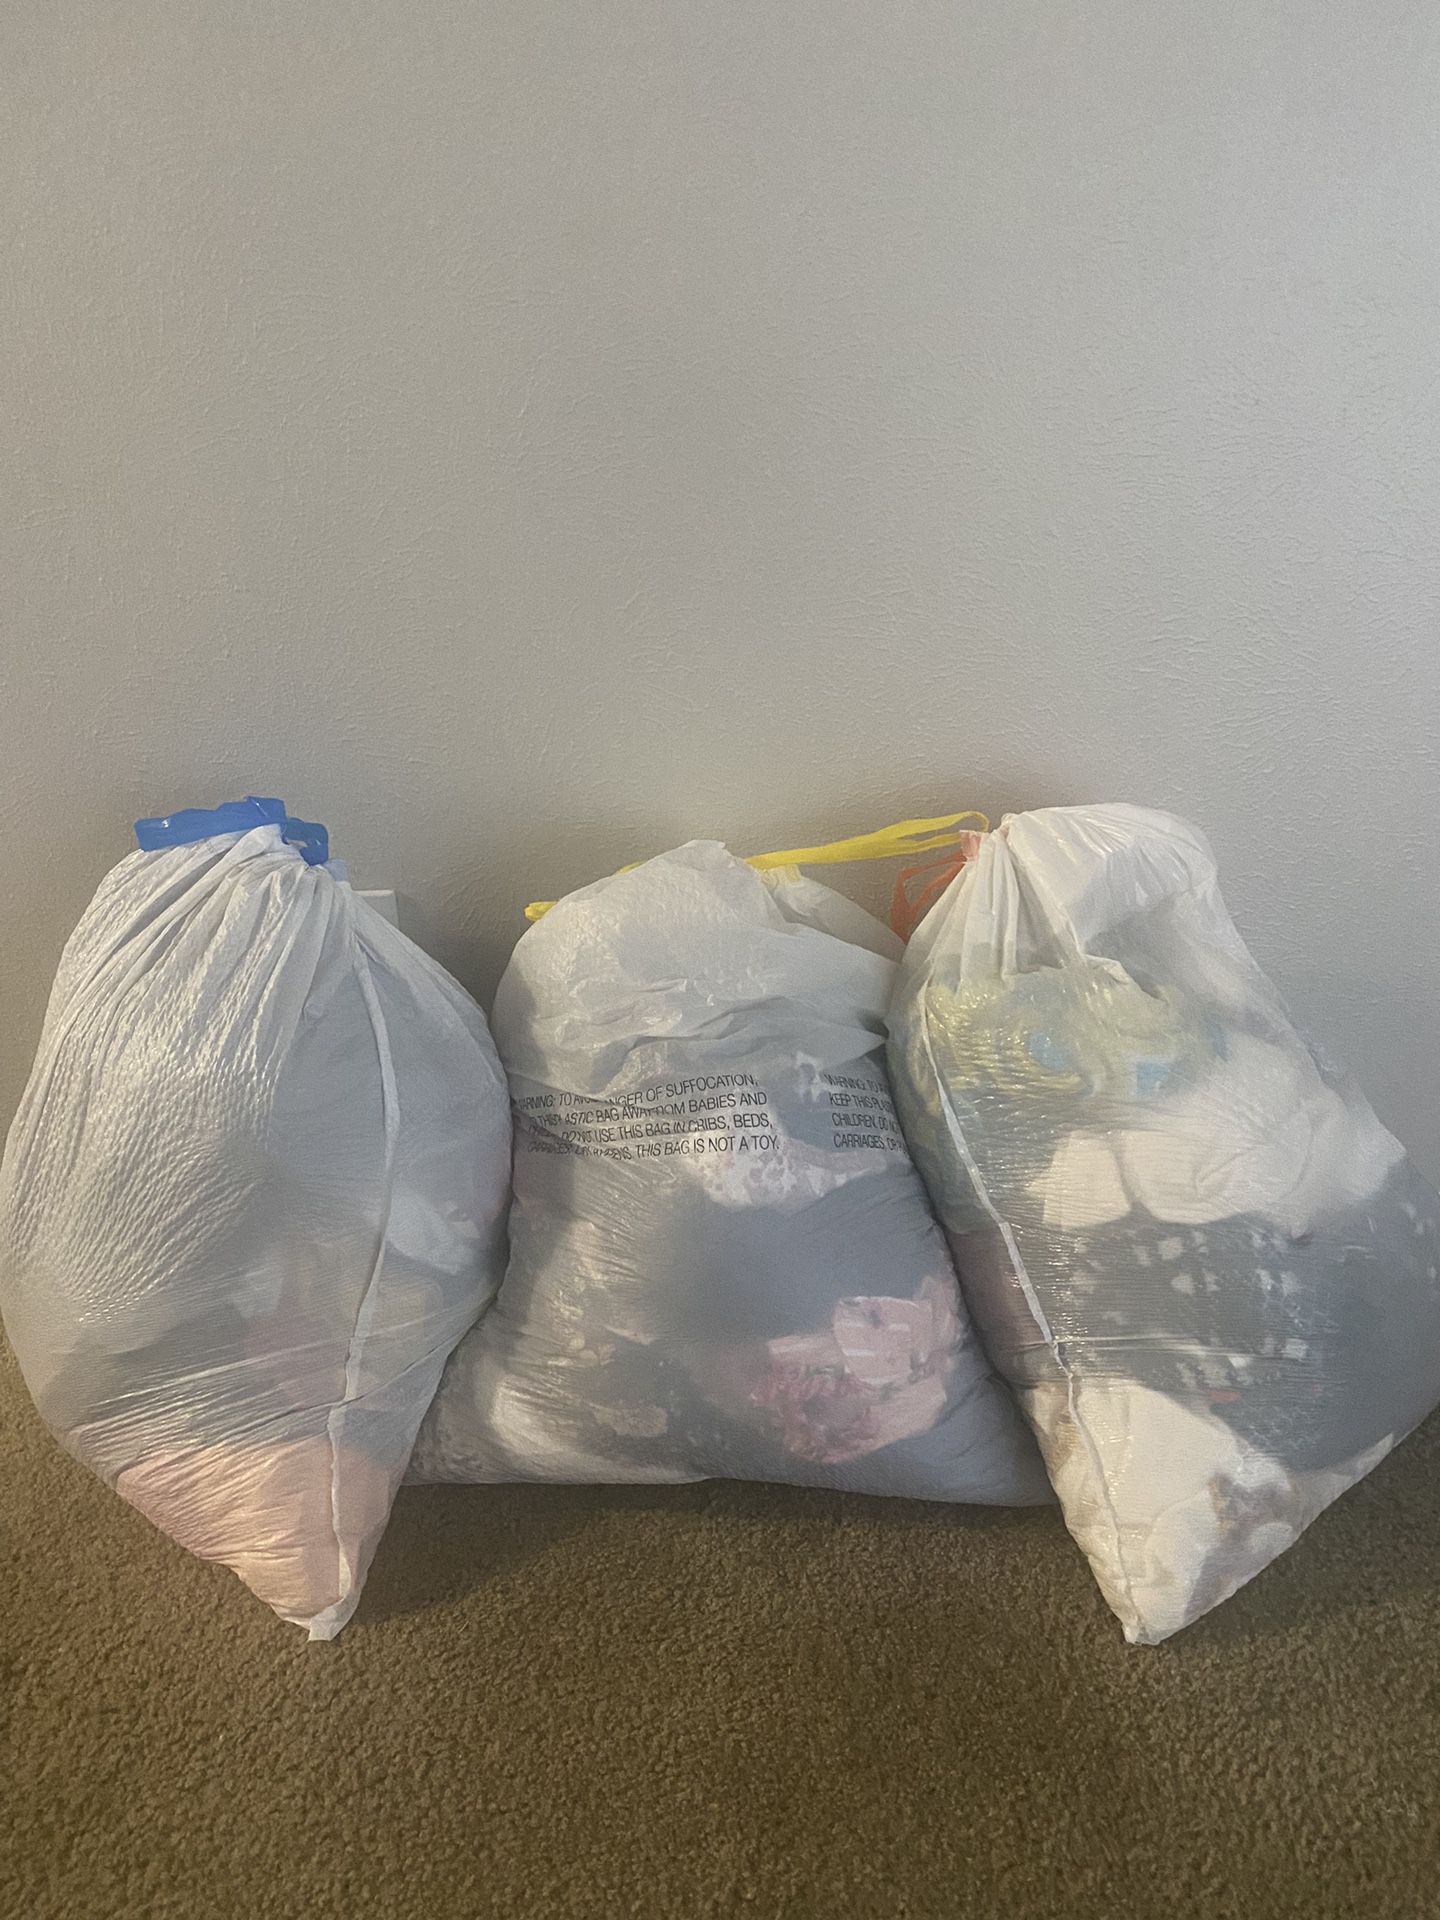 3 FULL Bags Of Women’s Clothes Bundle